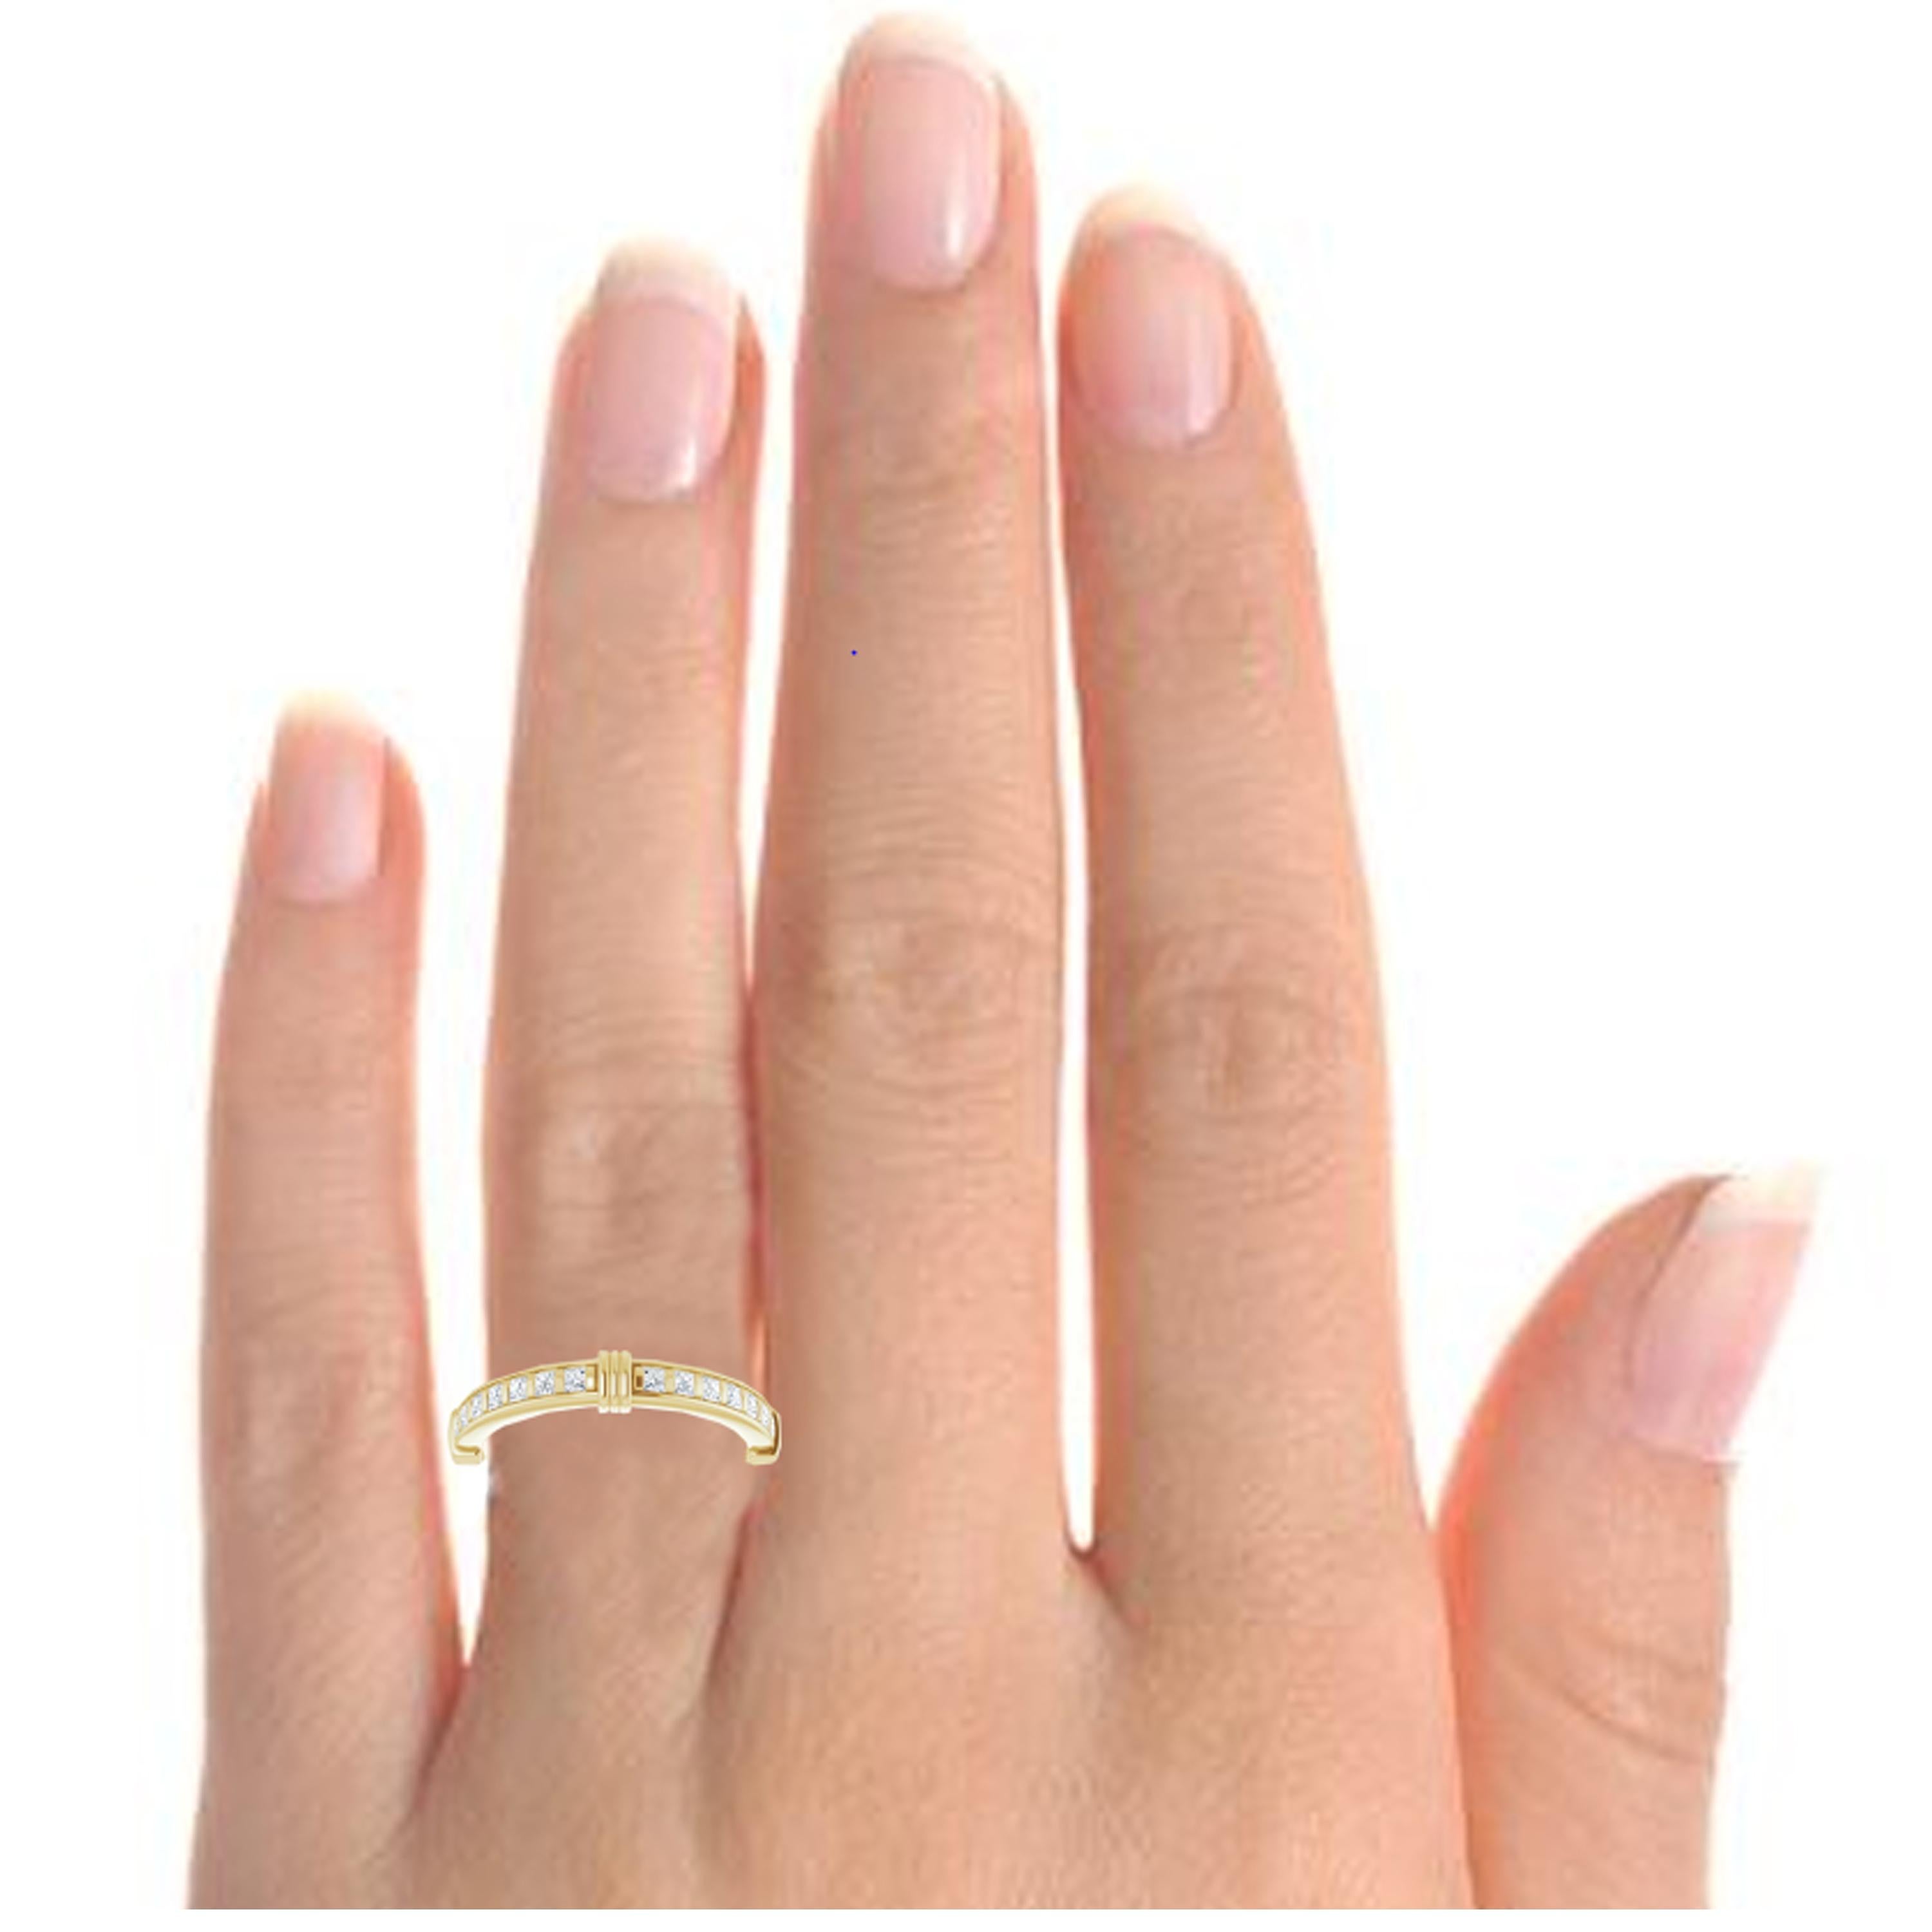 Brilliant princess cut natural diamonds float along the shank of this eternity band. Meticulously handcrafted in 18k yellow gold with a high polished finish, this wedding ring can be ordered with engraving options. Made for finger size 7, this